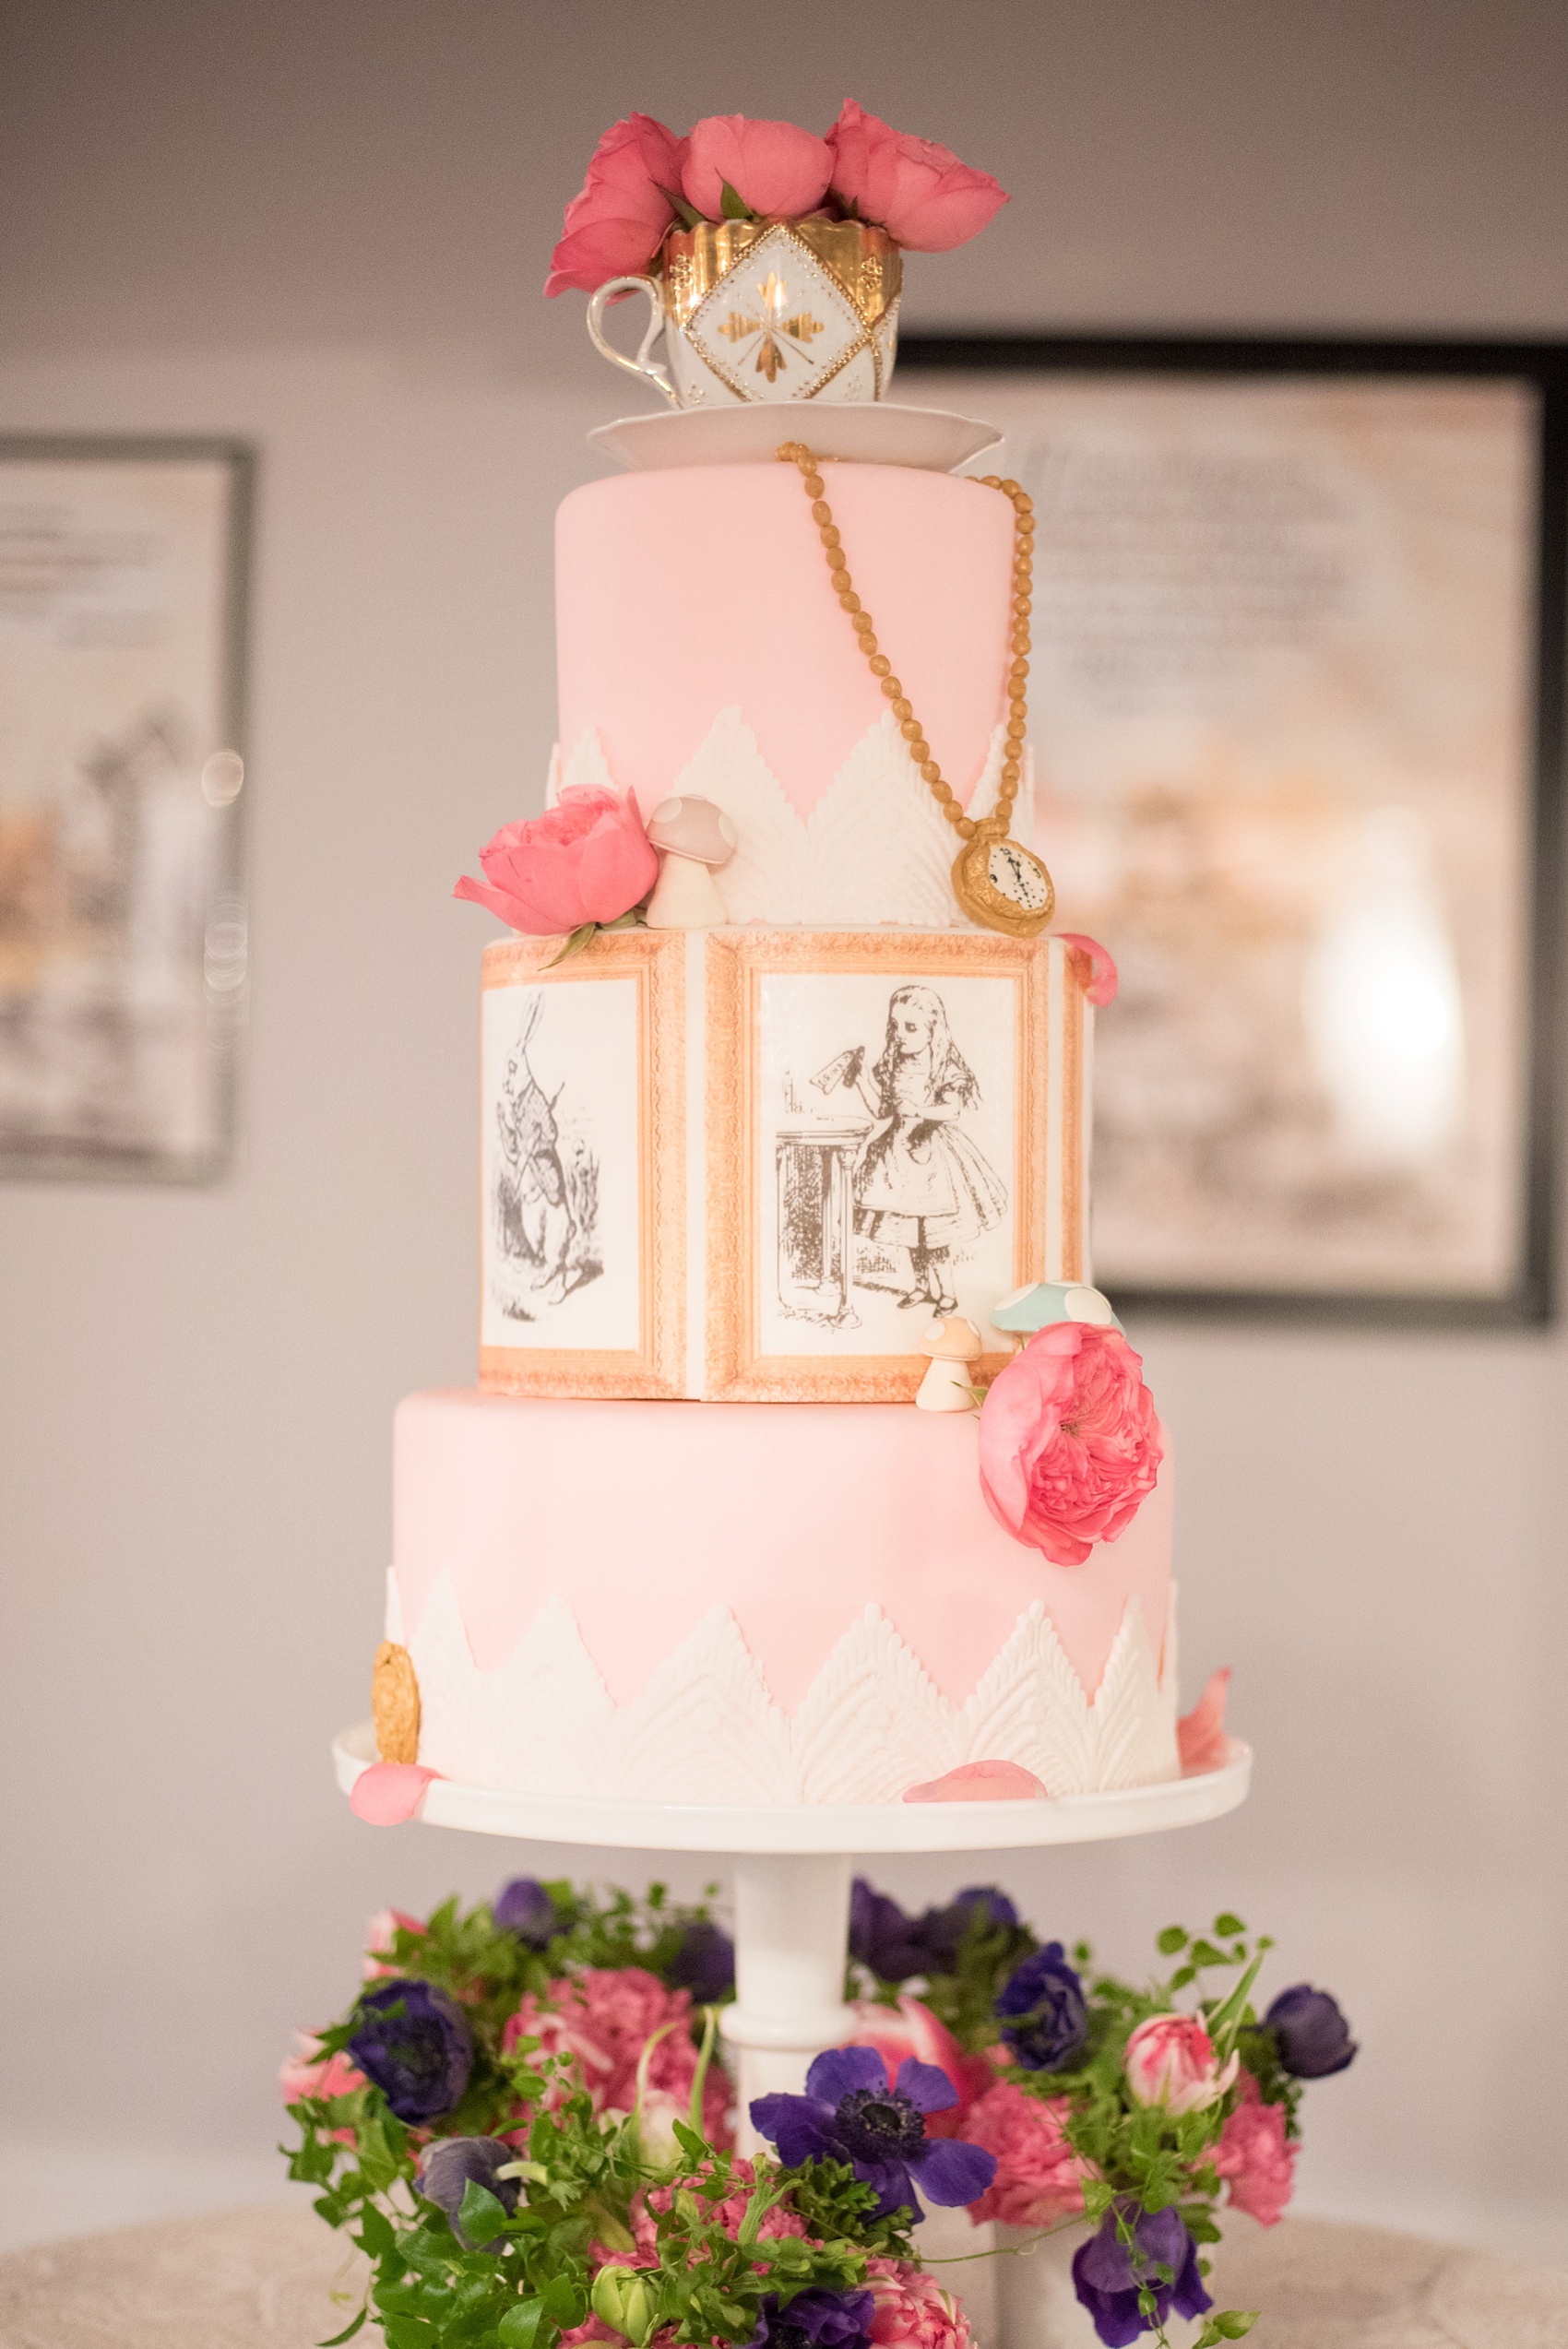 Raleigh wedding photographer Mikkel Paige captures Mim's House opening night, with an Alice in Wonderland theme pink lace cake.